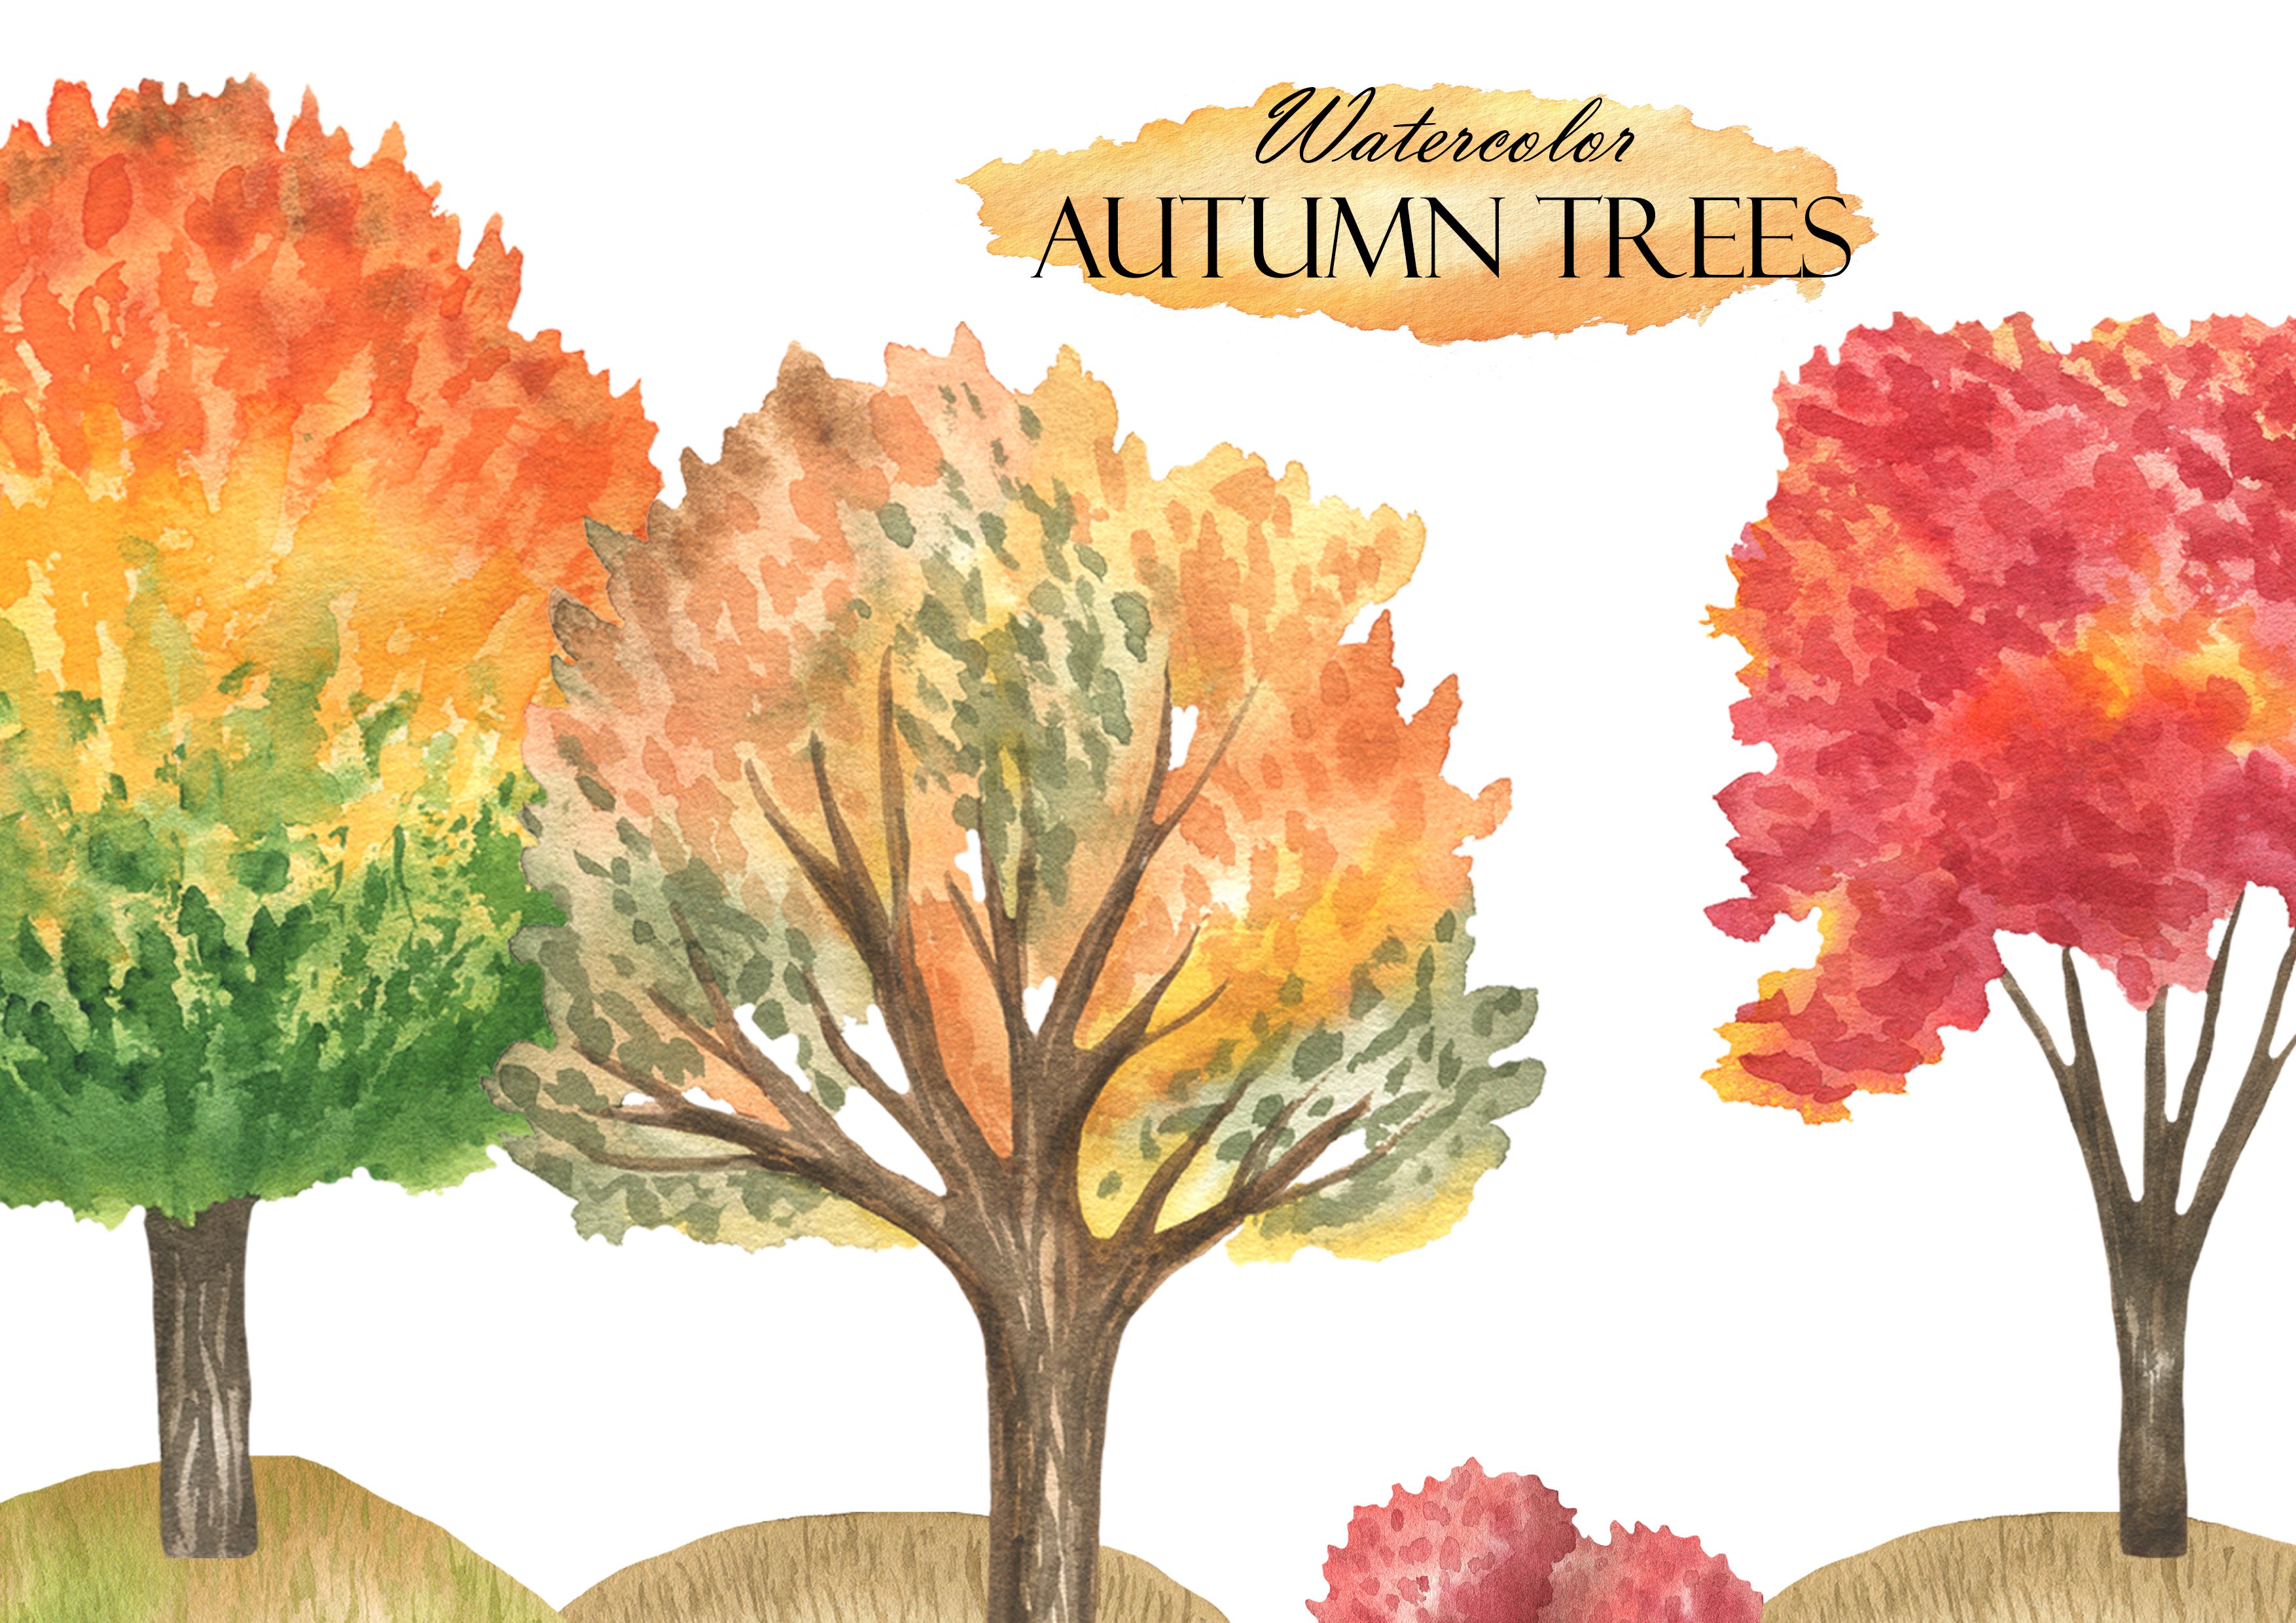 Watercolor painting of trees with autumn colors by Isobelle Ann Dods-Withers.